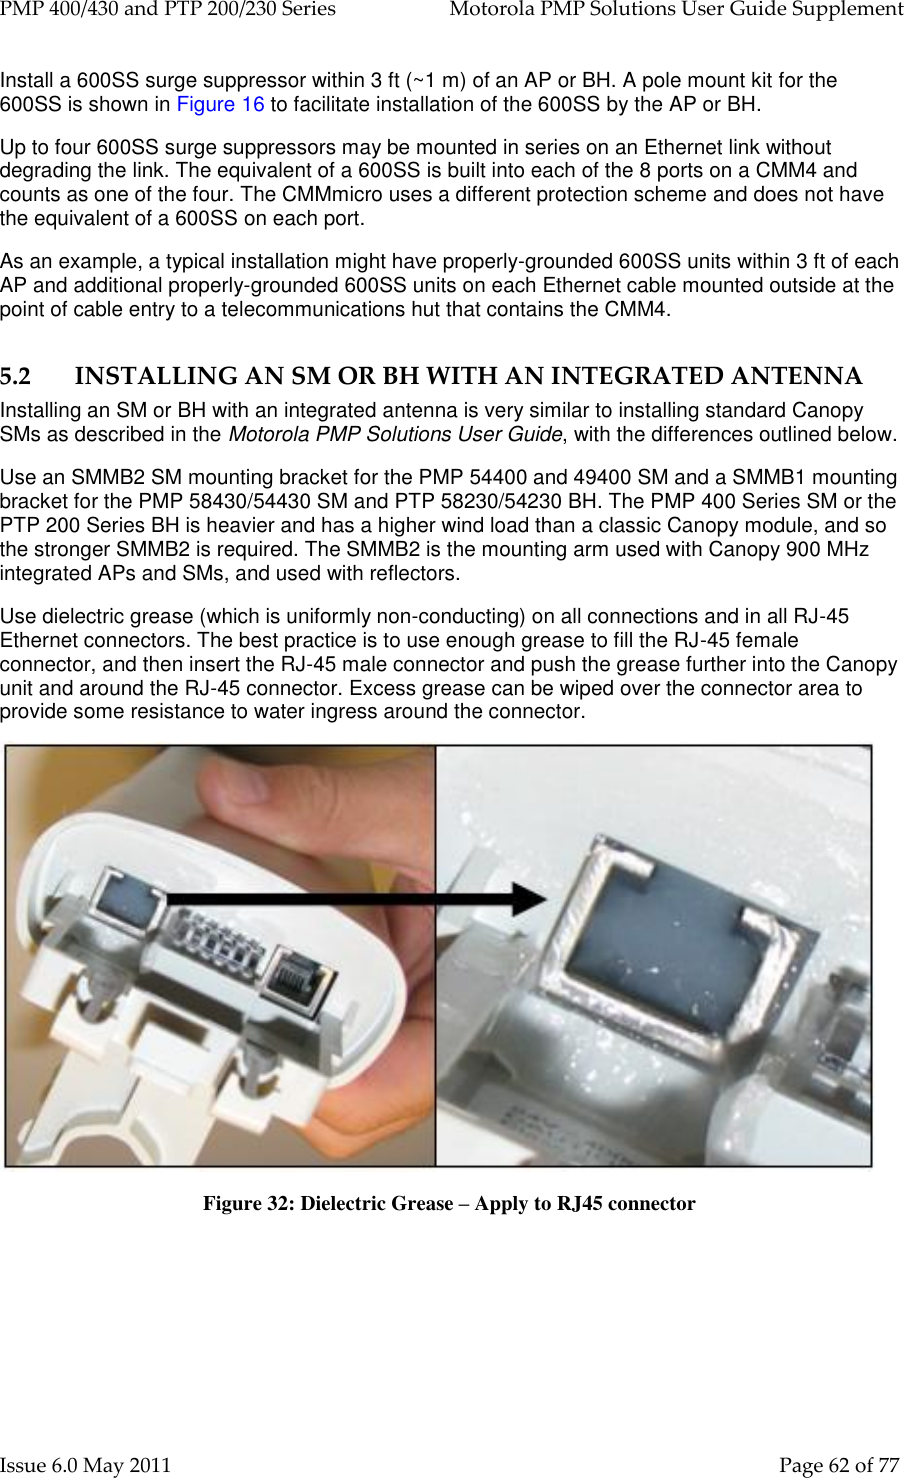 PMP 400/430 and PTP 200/230 Series   Motorola PMP Solutions User Guide Supplement Issue 6.0 May 2011    Page 62 of 77 Install a 600SS surge suppressor within 3 ft (~1 m) of an AP or BH. A pole mount kit for the 600SS is shown in Figure 16 to facilitate installation of the 600SS by the AP or BH. Up to four 600SS surge suppressors may be mounted in series on an Ethernet link without degrading the link. The equivalent of a 600SS is built into each of the 8 ports on a CMM4 and counts as one of the four. The CMMmicro uses a different protection scheme and does not have the equivalent of a 600SS on each port. As an example, a typical installation might have properly-grounded 600SS units within 3 ft of each AP and additional properly-grounded 600SS units on each Ethernet cable mounted outside at the point of cable entry to a telecommunications hut that contains the CMM4. 5.2 INSTALLING AN SM OR BH WITH AN INTEGRATED ANTENNA Installing an SM or BH with an integrated antenna is very similar to installing standard Canopy SMs as described in the Motorola PMP Solutions User Guide, with the differences outlined below. Use an SMMB2 SM mounting bracket for the PMP 54400 and 49400 SM and a SMMB1 mounting bracket for the PMP 58430/54430 SM and PTP 58230/54230 BH. The PMP 400 Series SM or the PTP 200 Series BH is heavier and has a higher wind load than a classic Canopy module, and so the stronger SMMB2 is required. The SMMB2 is the mounting arm used with Canopy 900 MHz integrated APs and SMs, and used with reflectors. Use dielectric grease (which is uniformly non-conducting) on all connections and in all RJ-45 Ethernet connectors. The best practice is to use enough grease to fill the RJ-45 female connector, and then insert the RJ-45 male connector and push the grease further into the Canopy unit and around the RJ-45 connector. Excess grease can be wiped over the connector area to provide some resistance to water ingress around the connector.  Figure 32: Dielectric Grease – Apply to RJ45 connector  